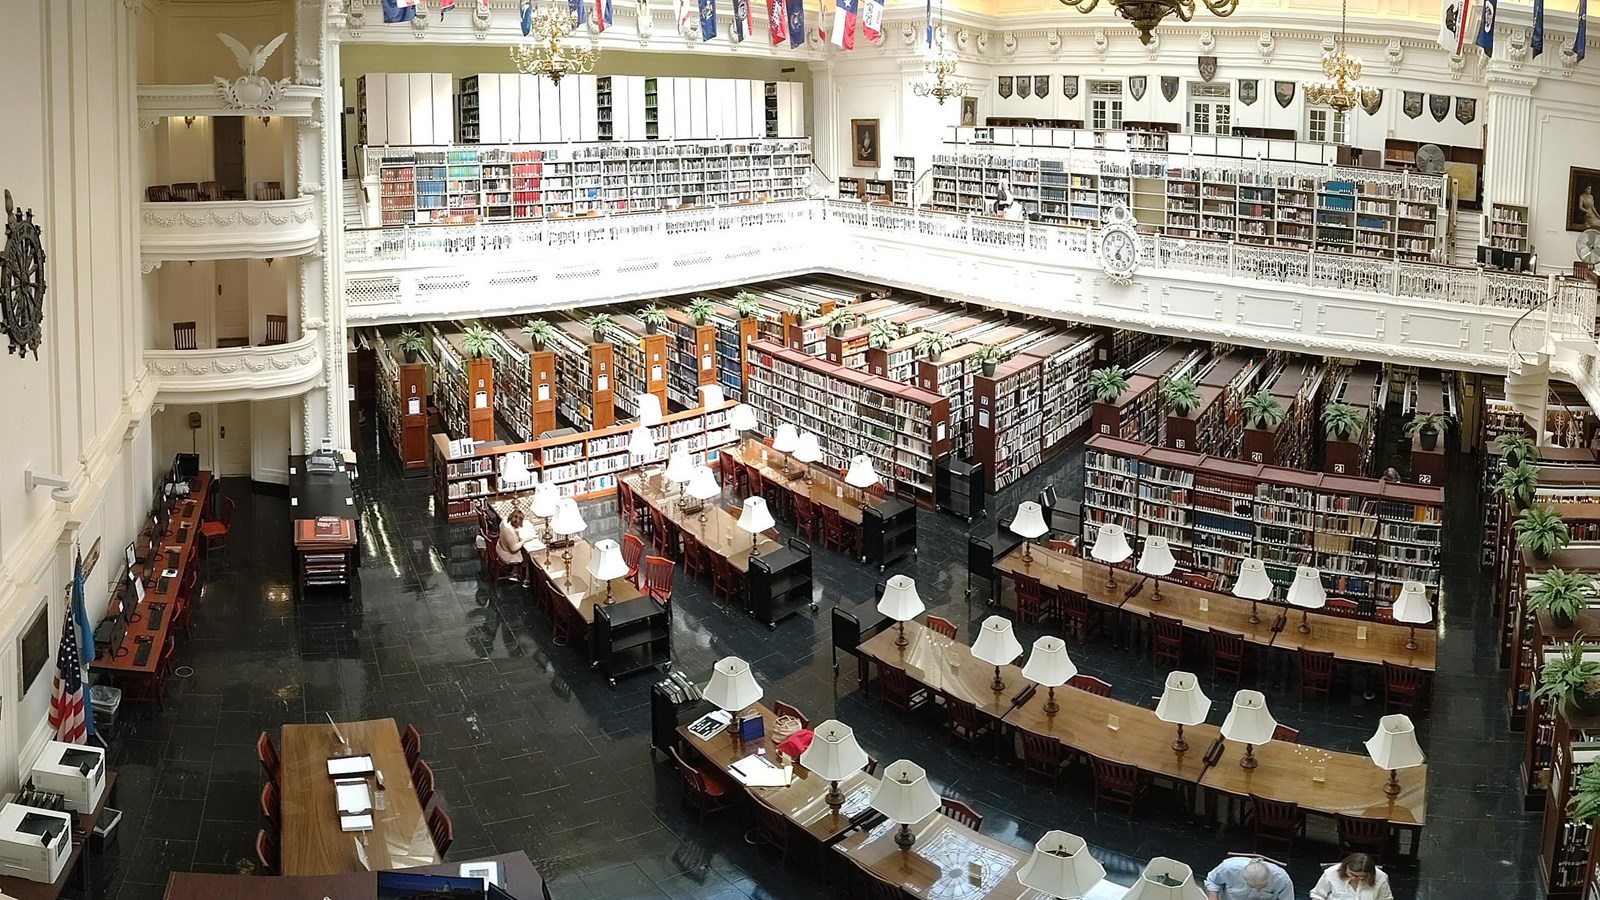 Shelves and desks in a large library room viewed from a balcony.